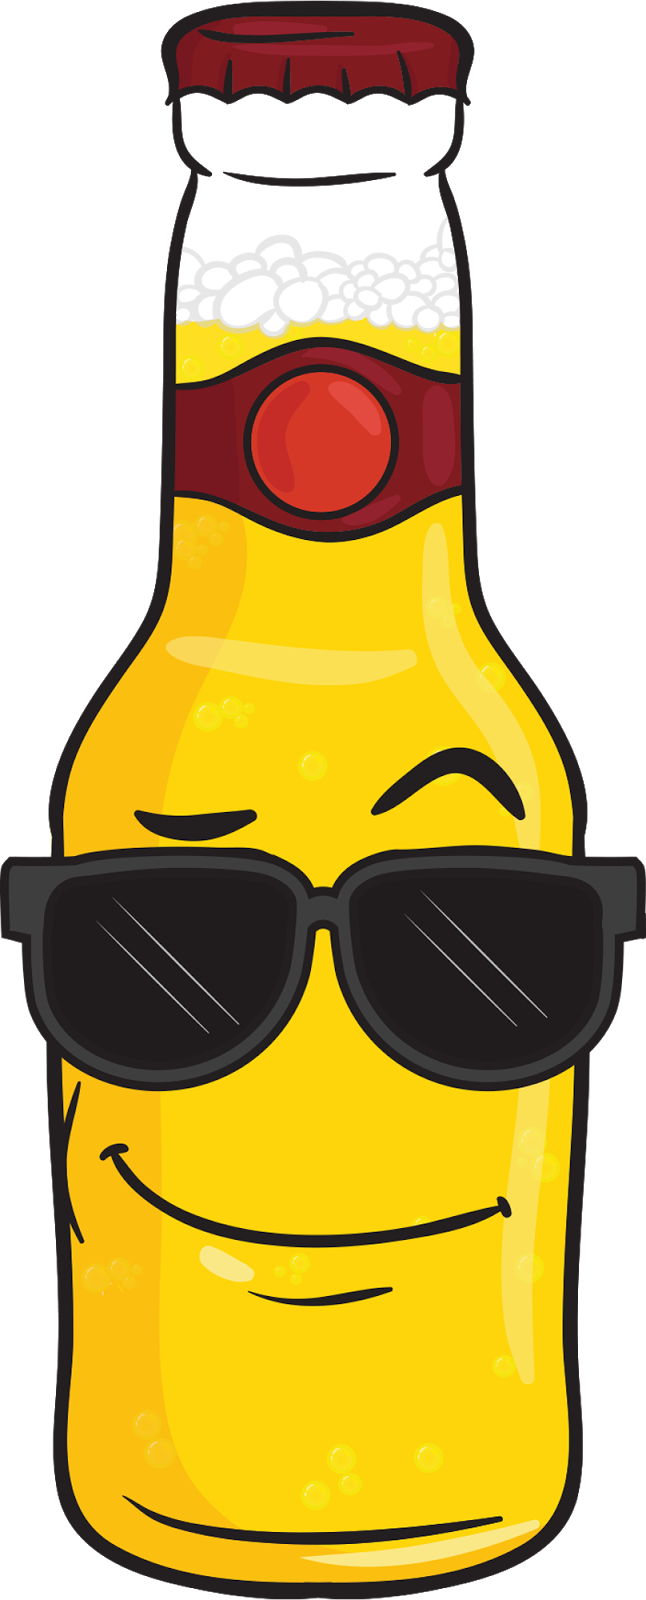 Beer emoji wearing shades and a cool grin